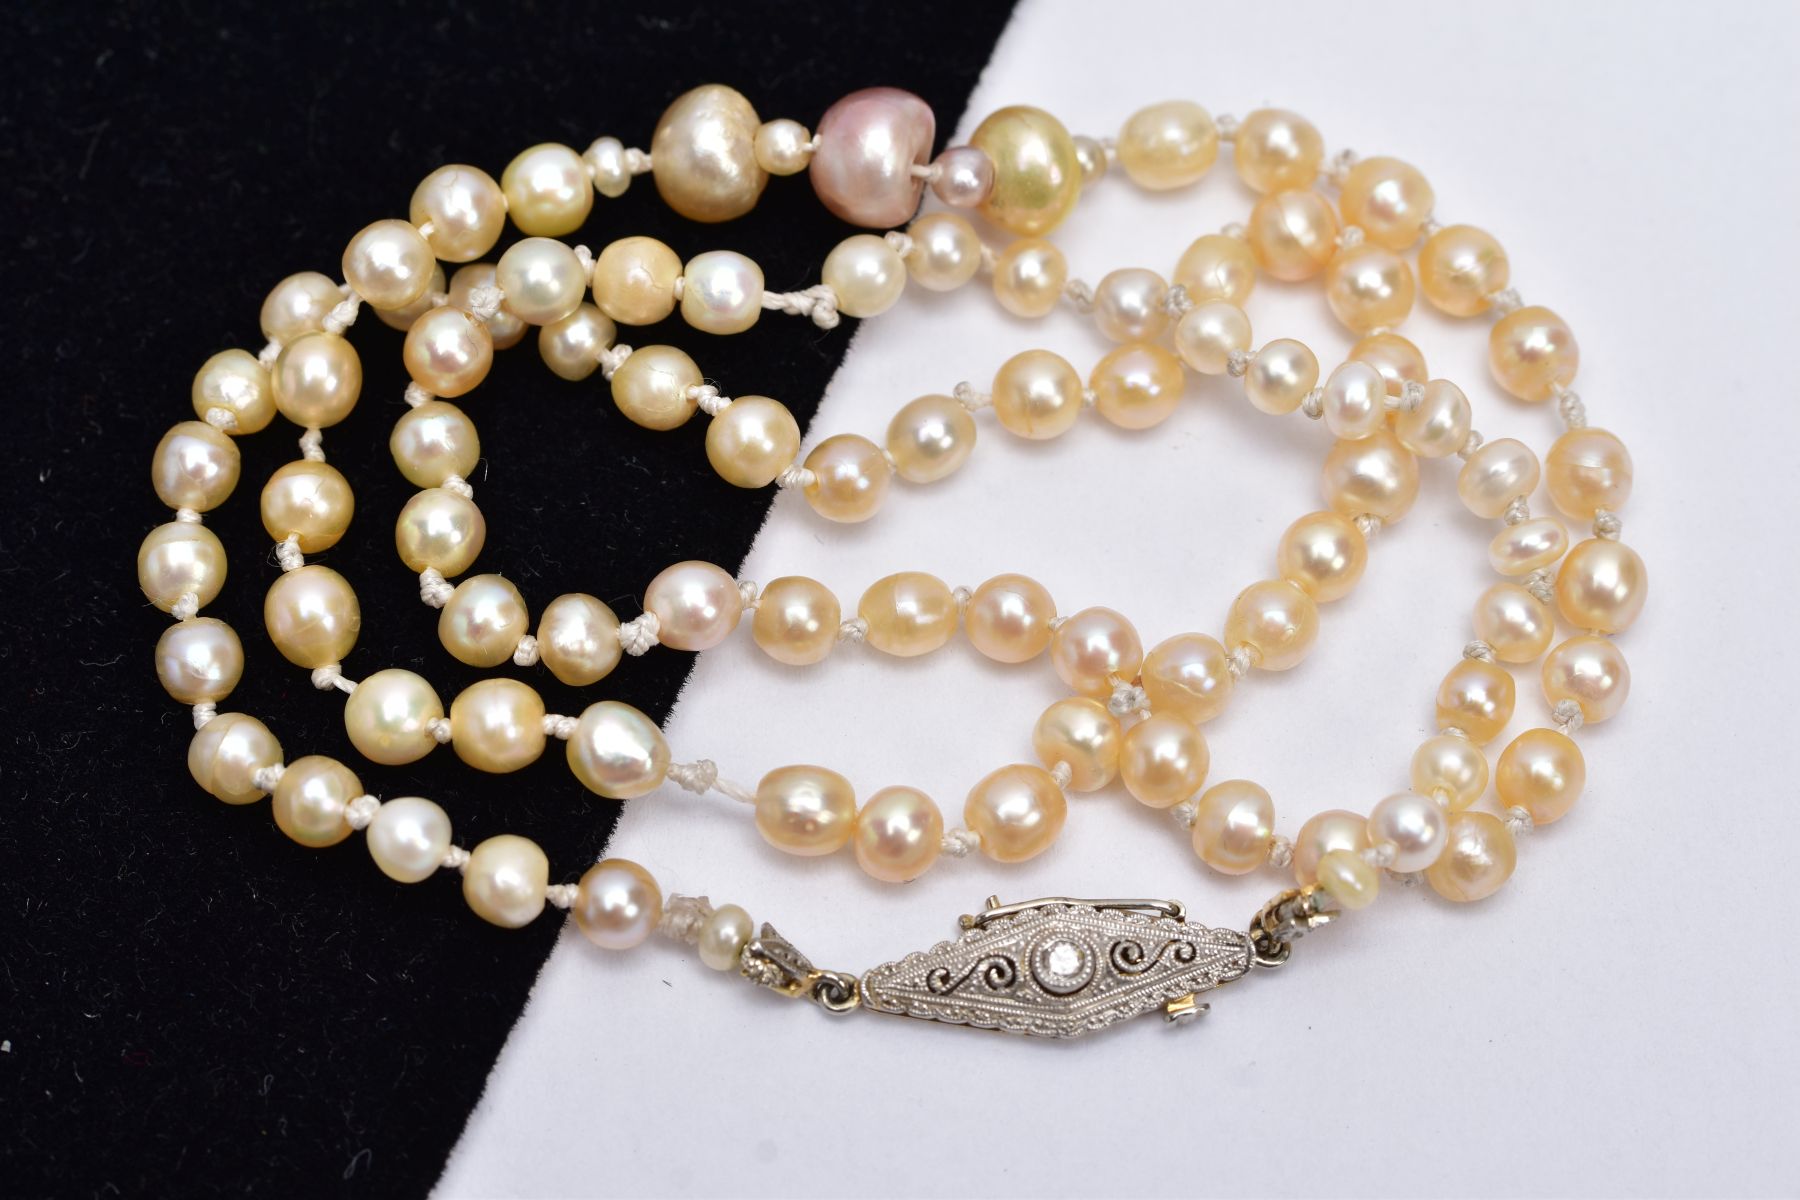 A FRESHWATER PEARL NECKLET, designed with a row of graduated pearls, fitted with yellow metal